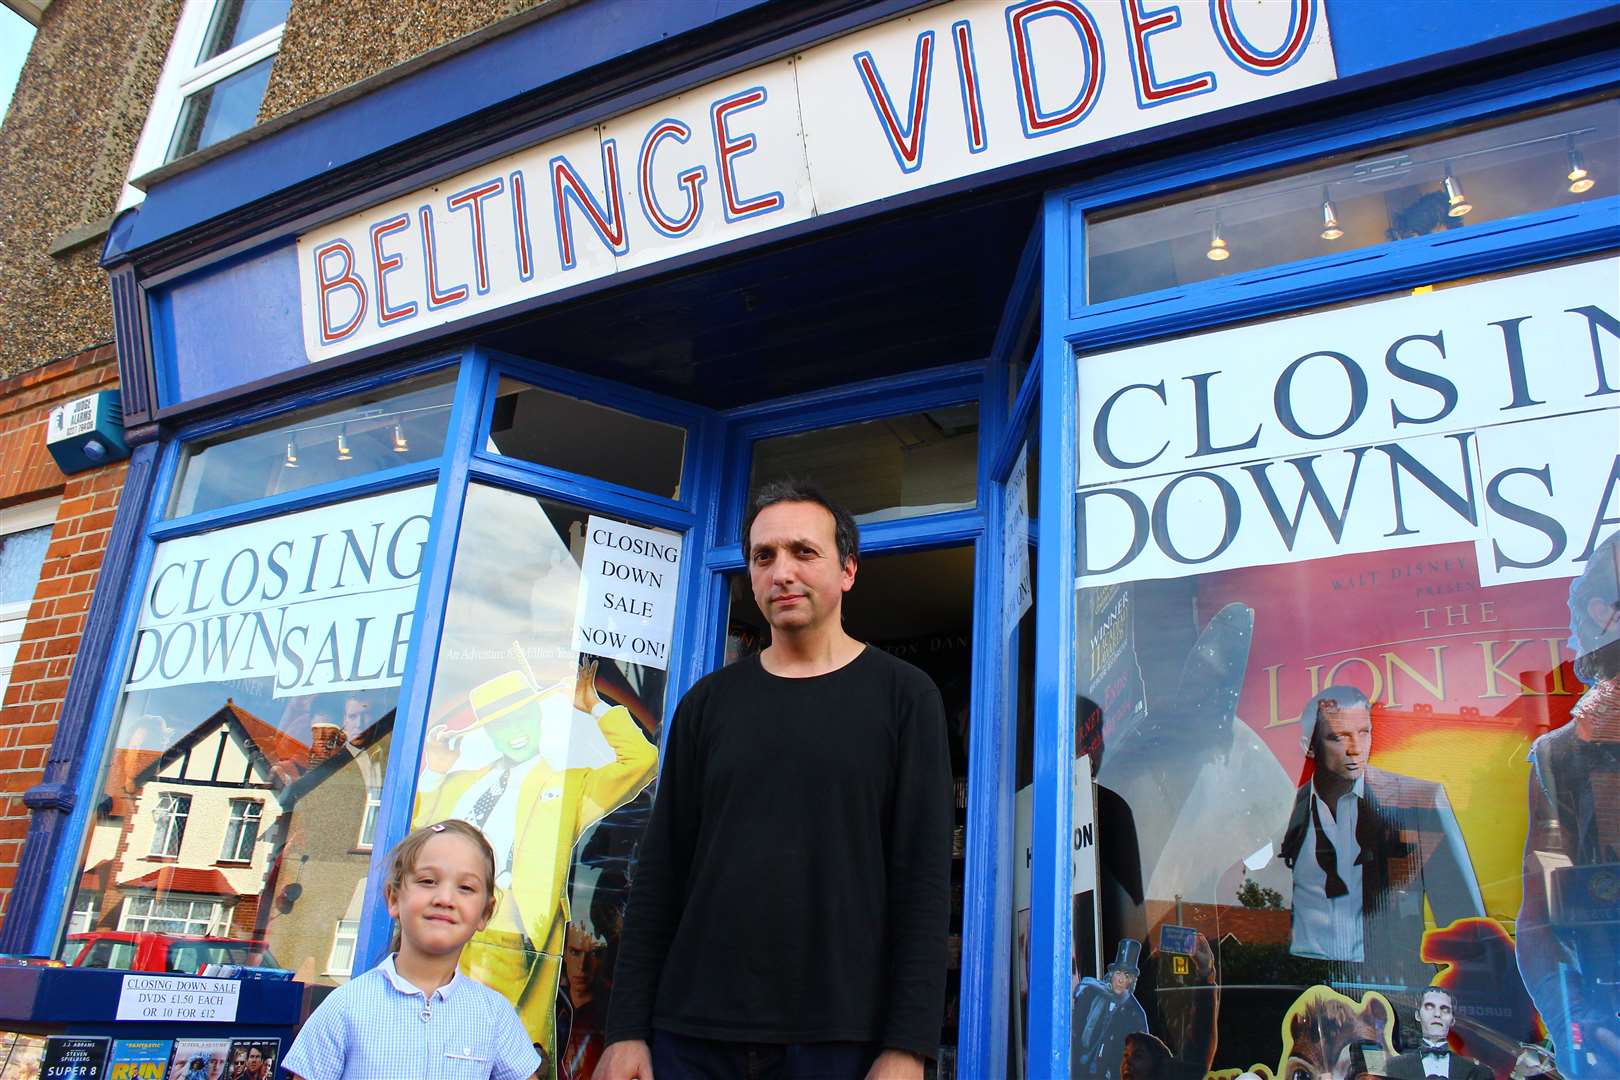 Giles Hando - pictured with his daughter Isabella - is closing his Beltinge Video store. Picture: Joe Wright